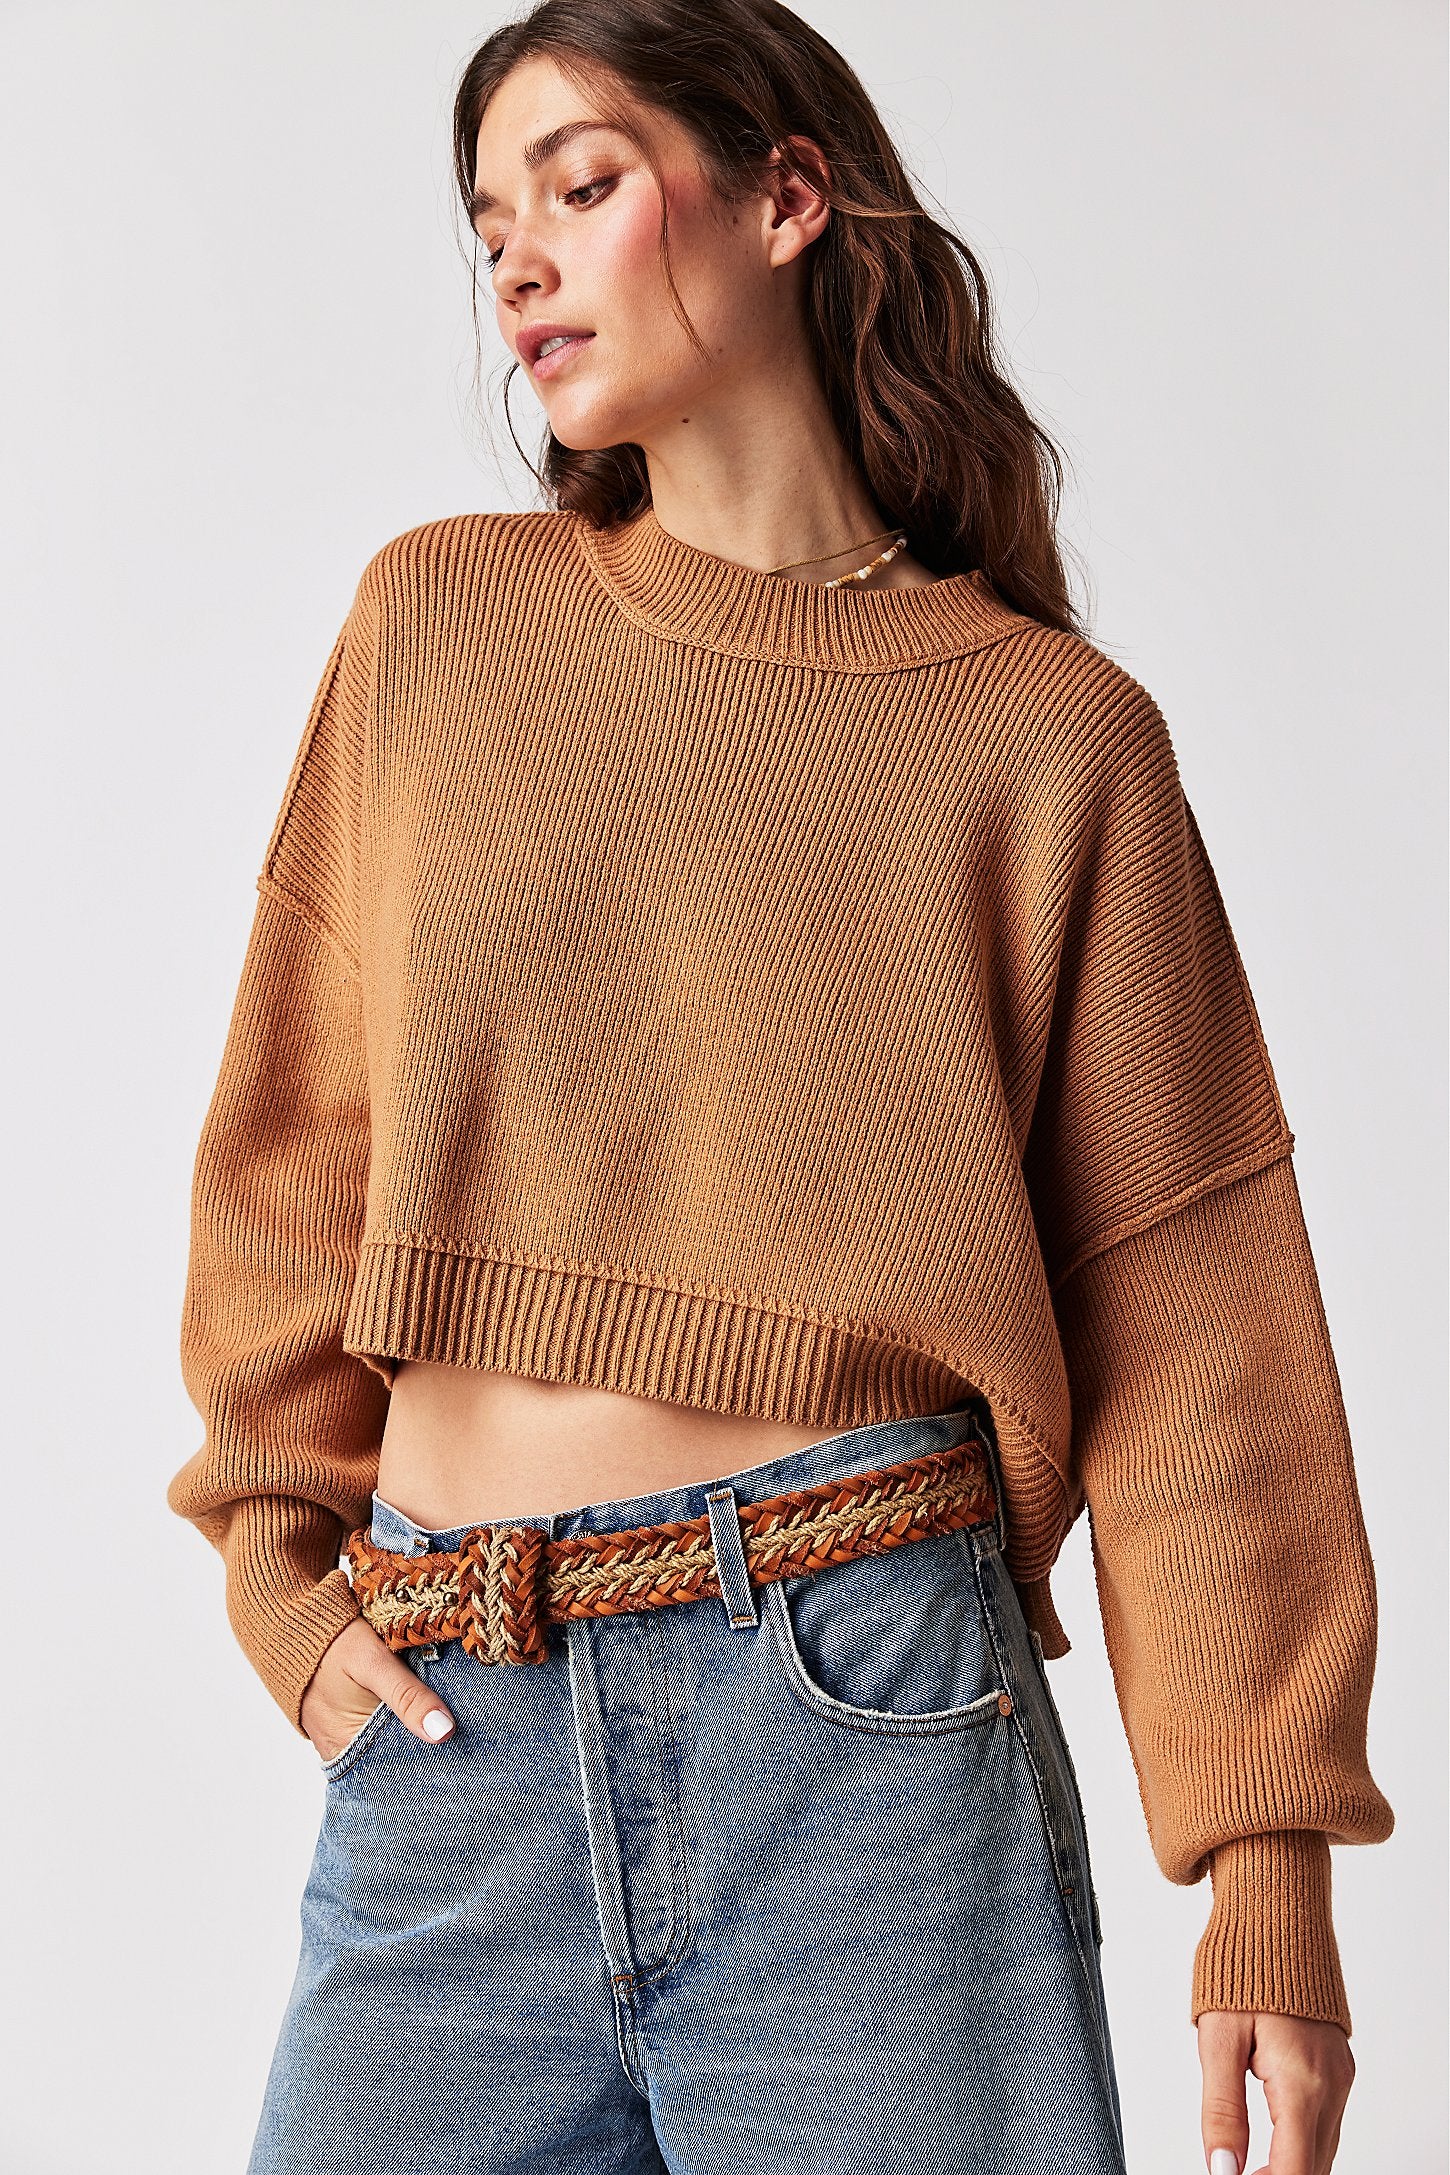 FREE PEOPLE EASY STREET CROP PULLOVER IN CAMEL